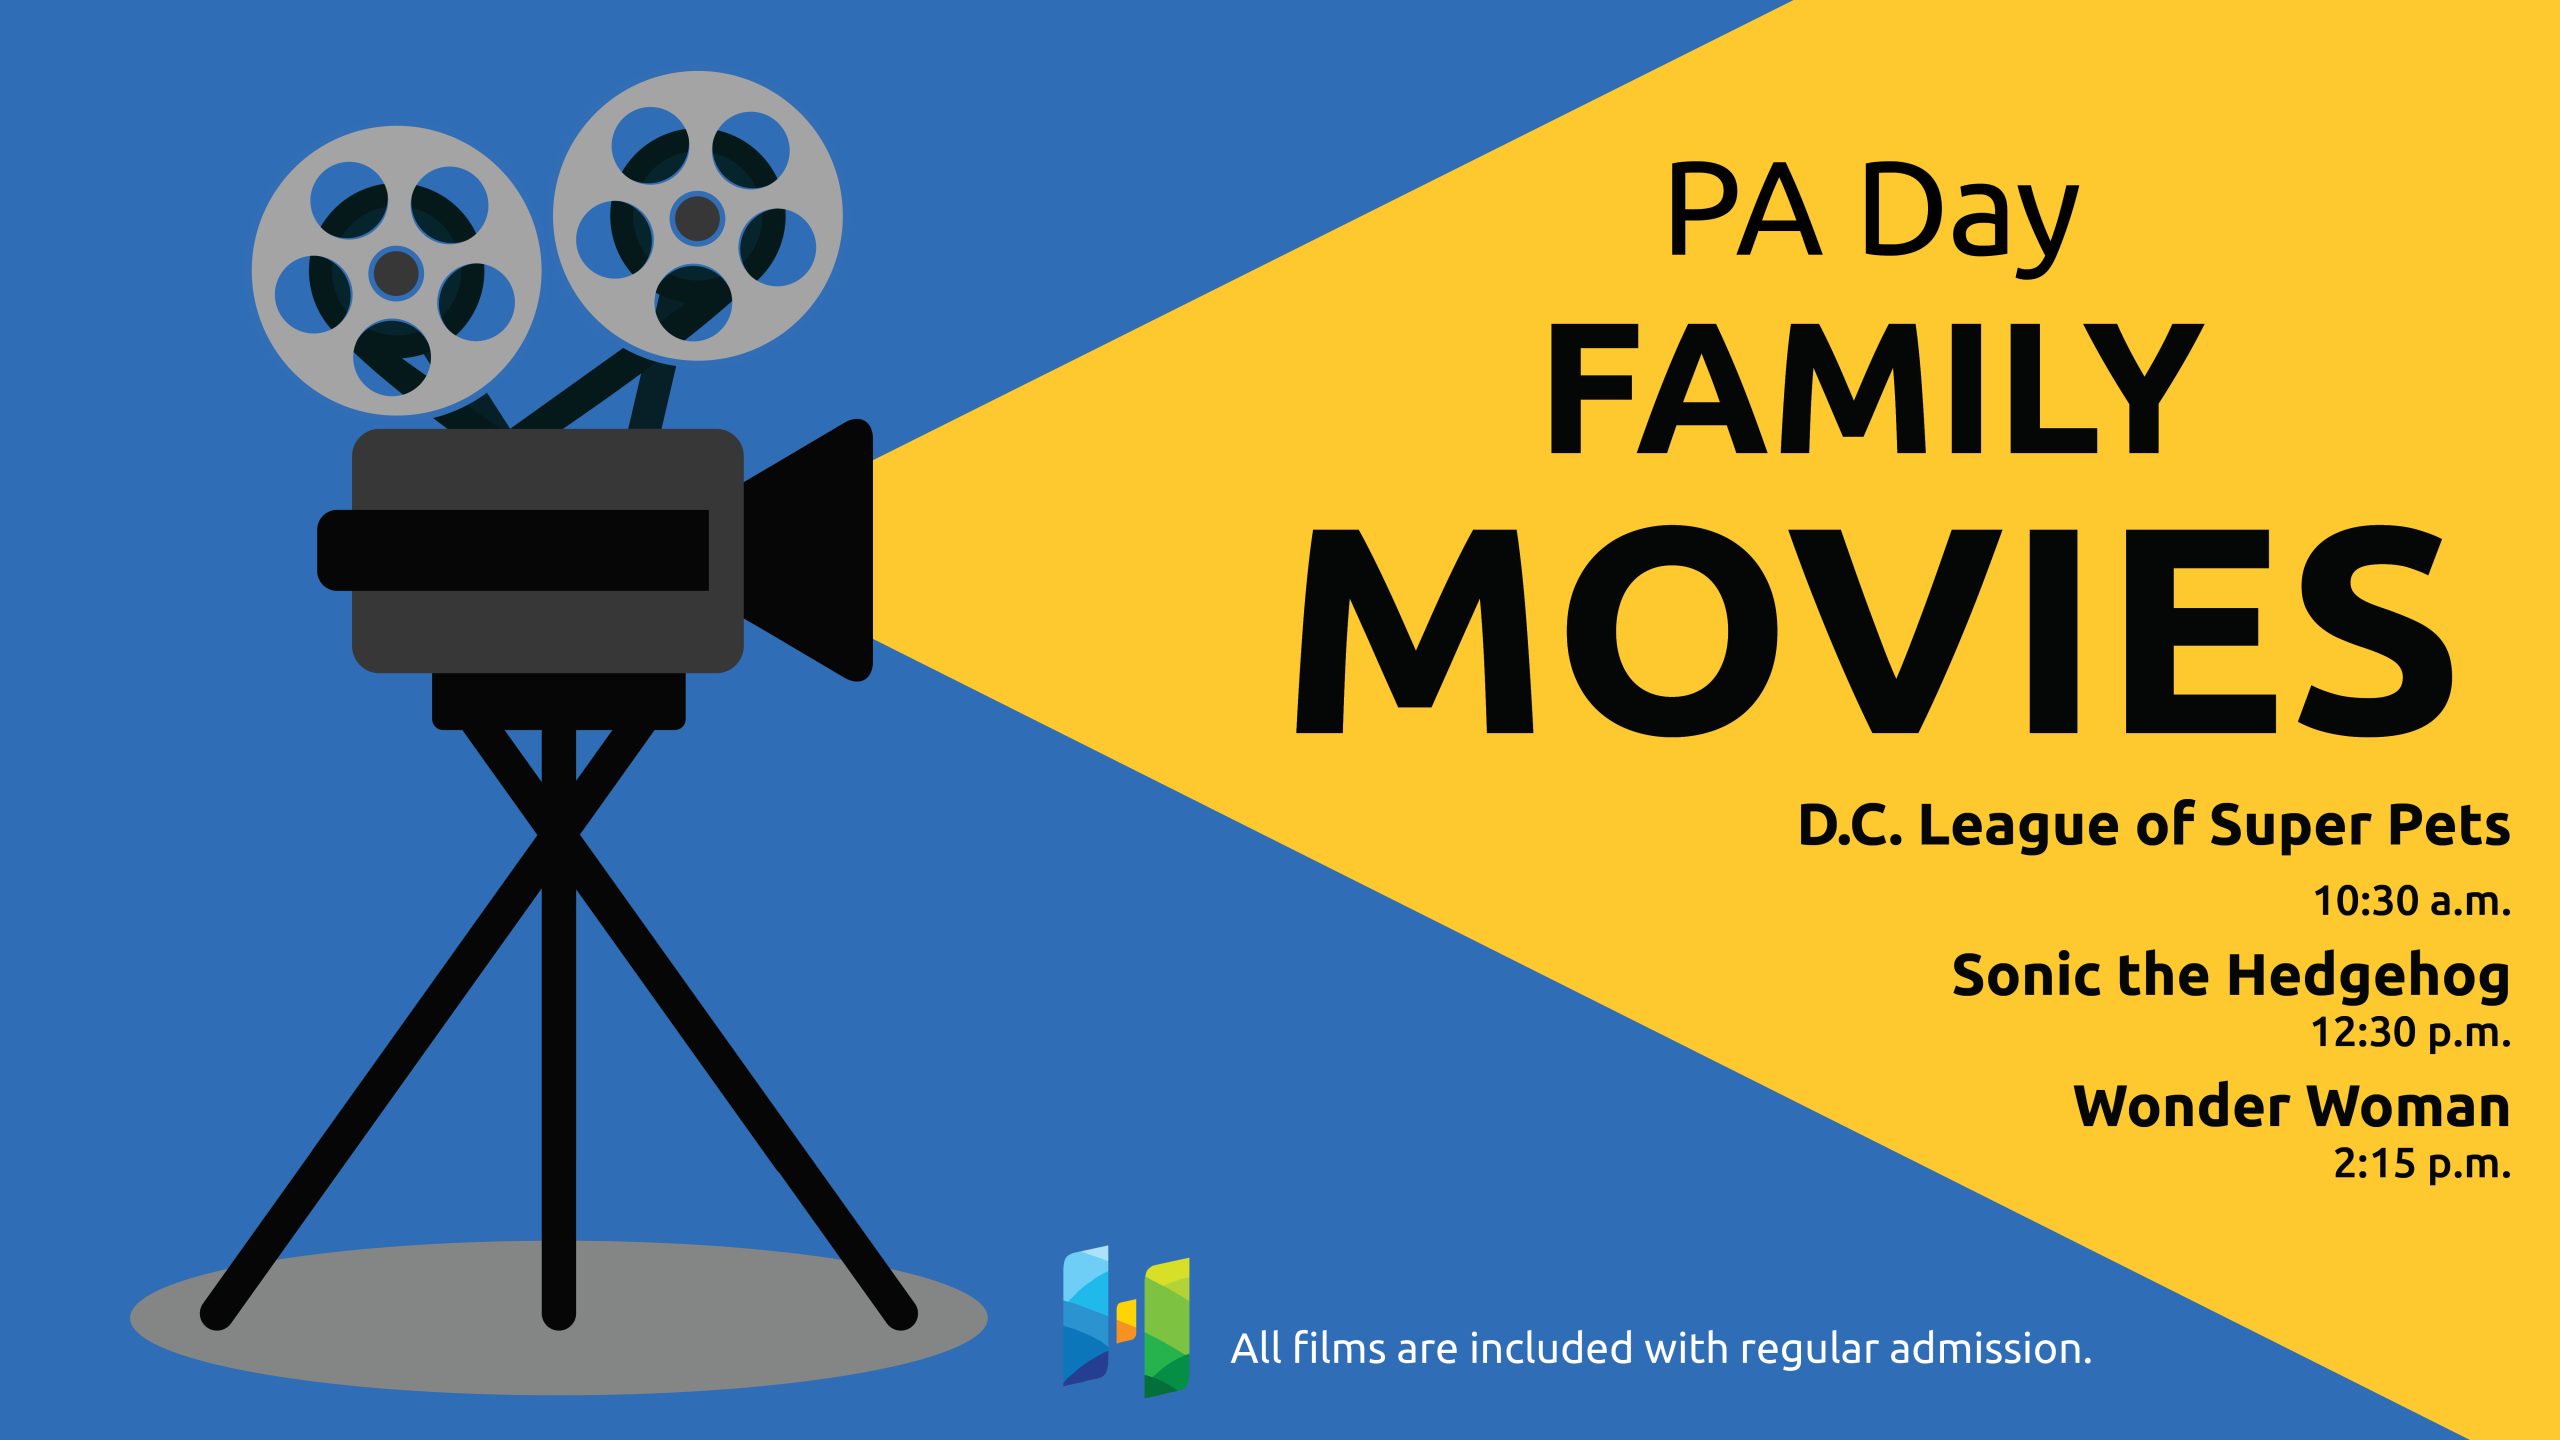 Illustration of a movie projector with text promoting family movies